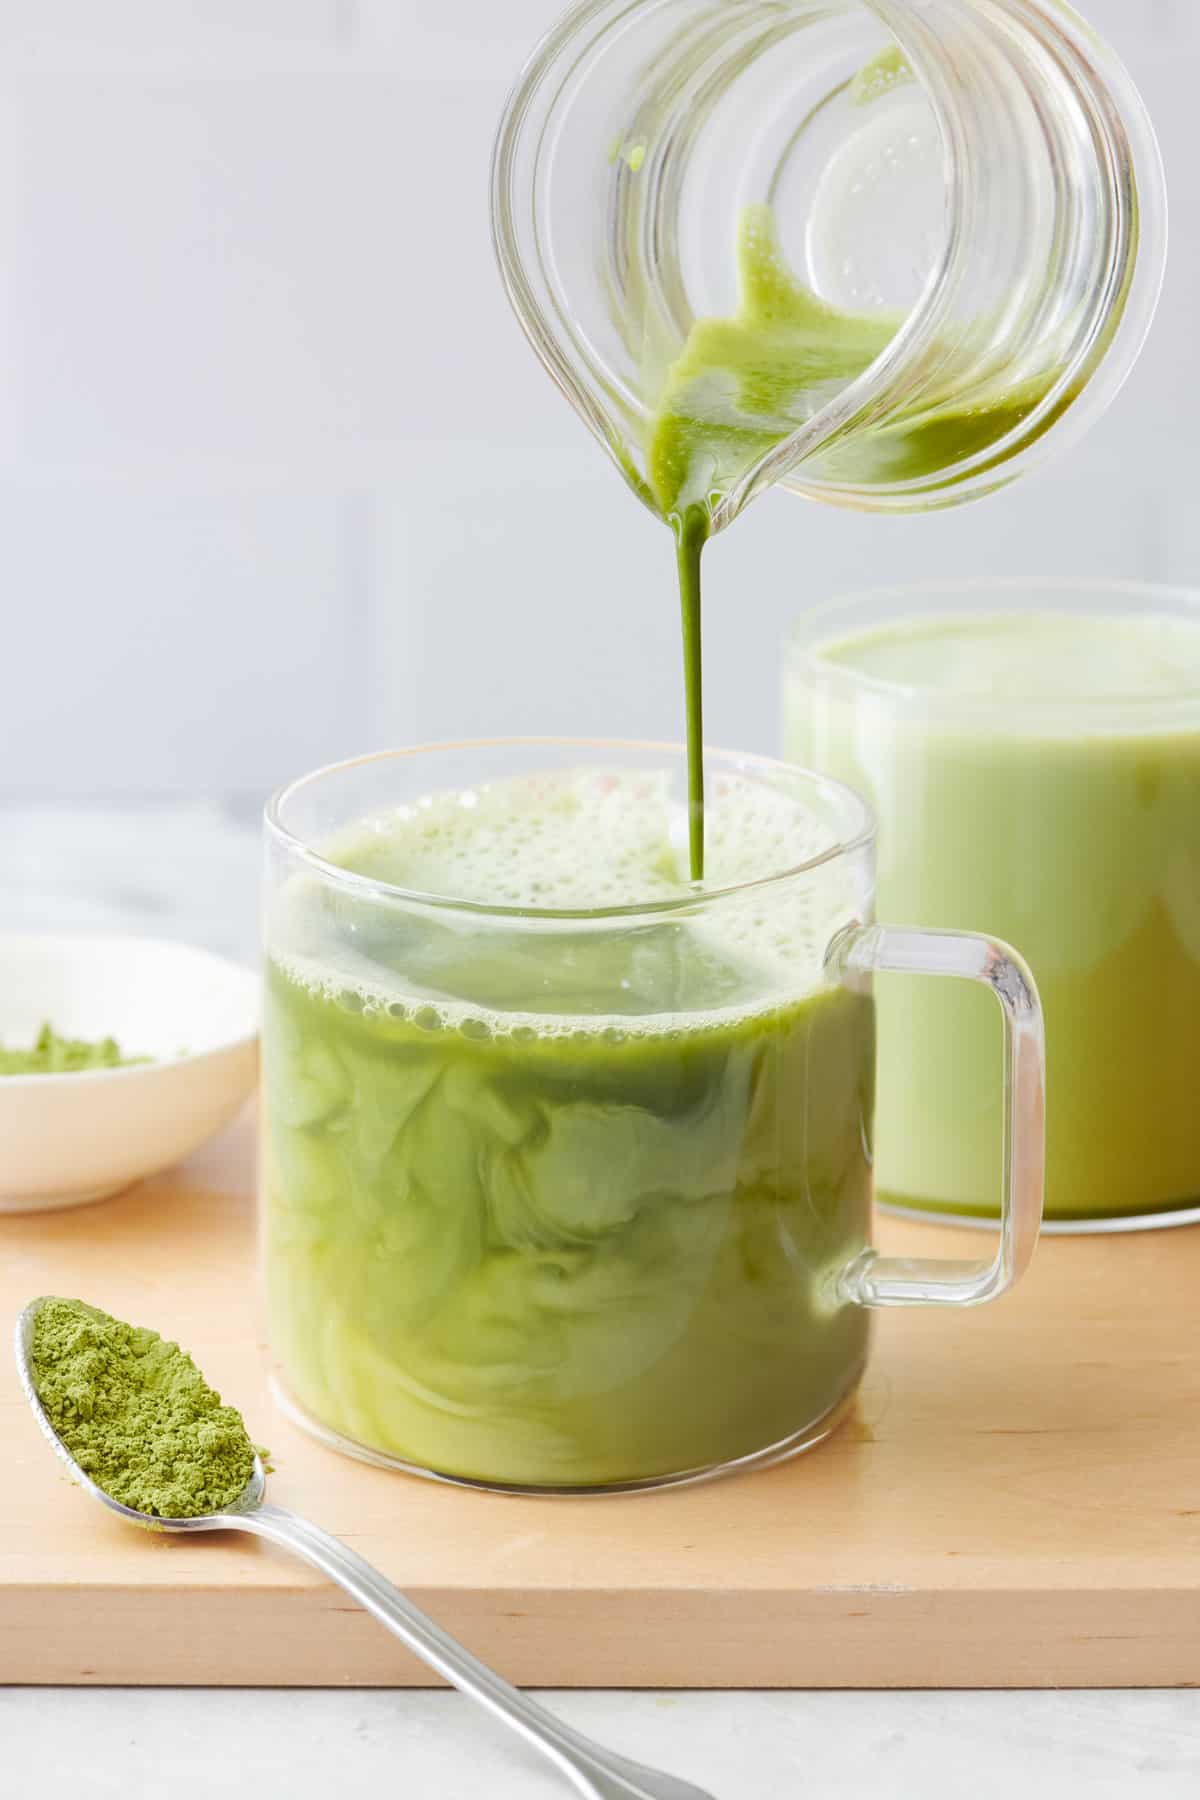 Matcha latte mixture is poured in to warm milk in a glass mug with another mug of latte nearby.